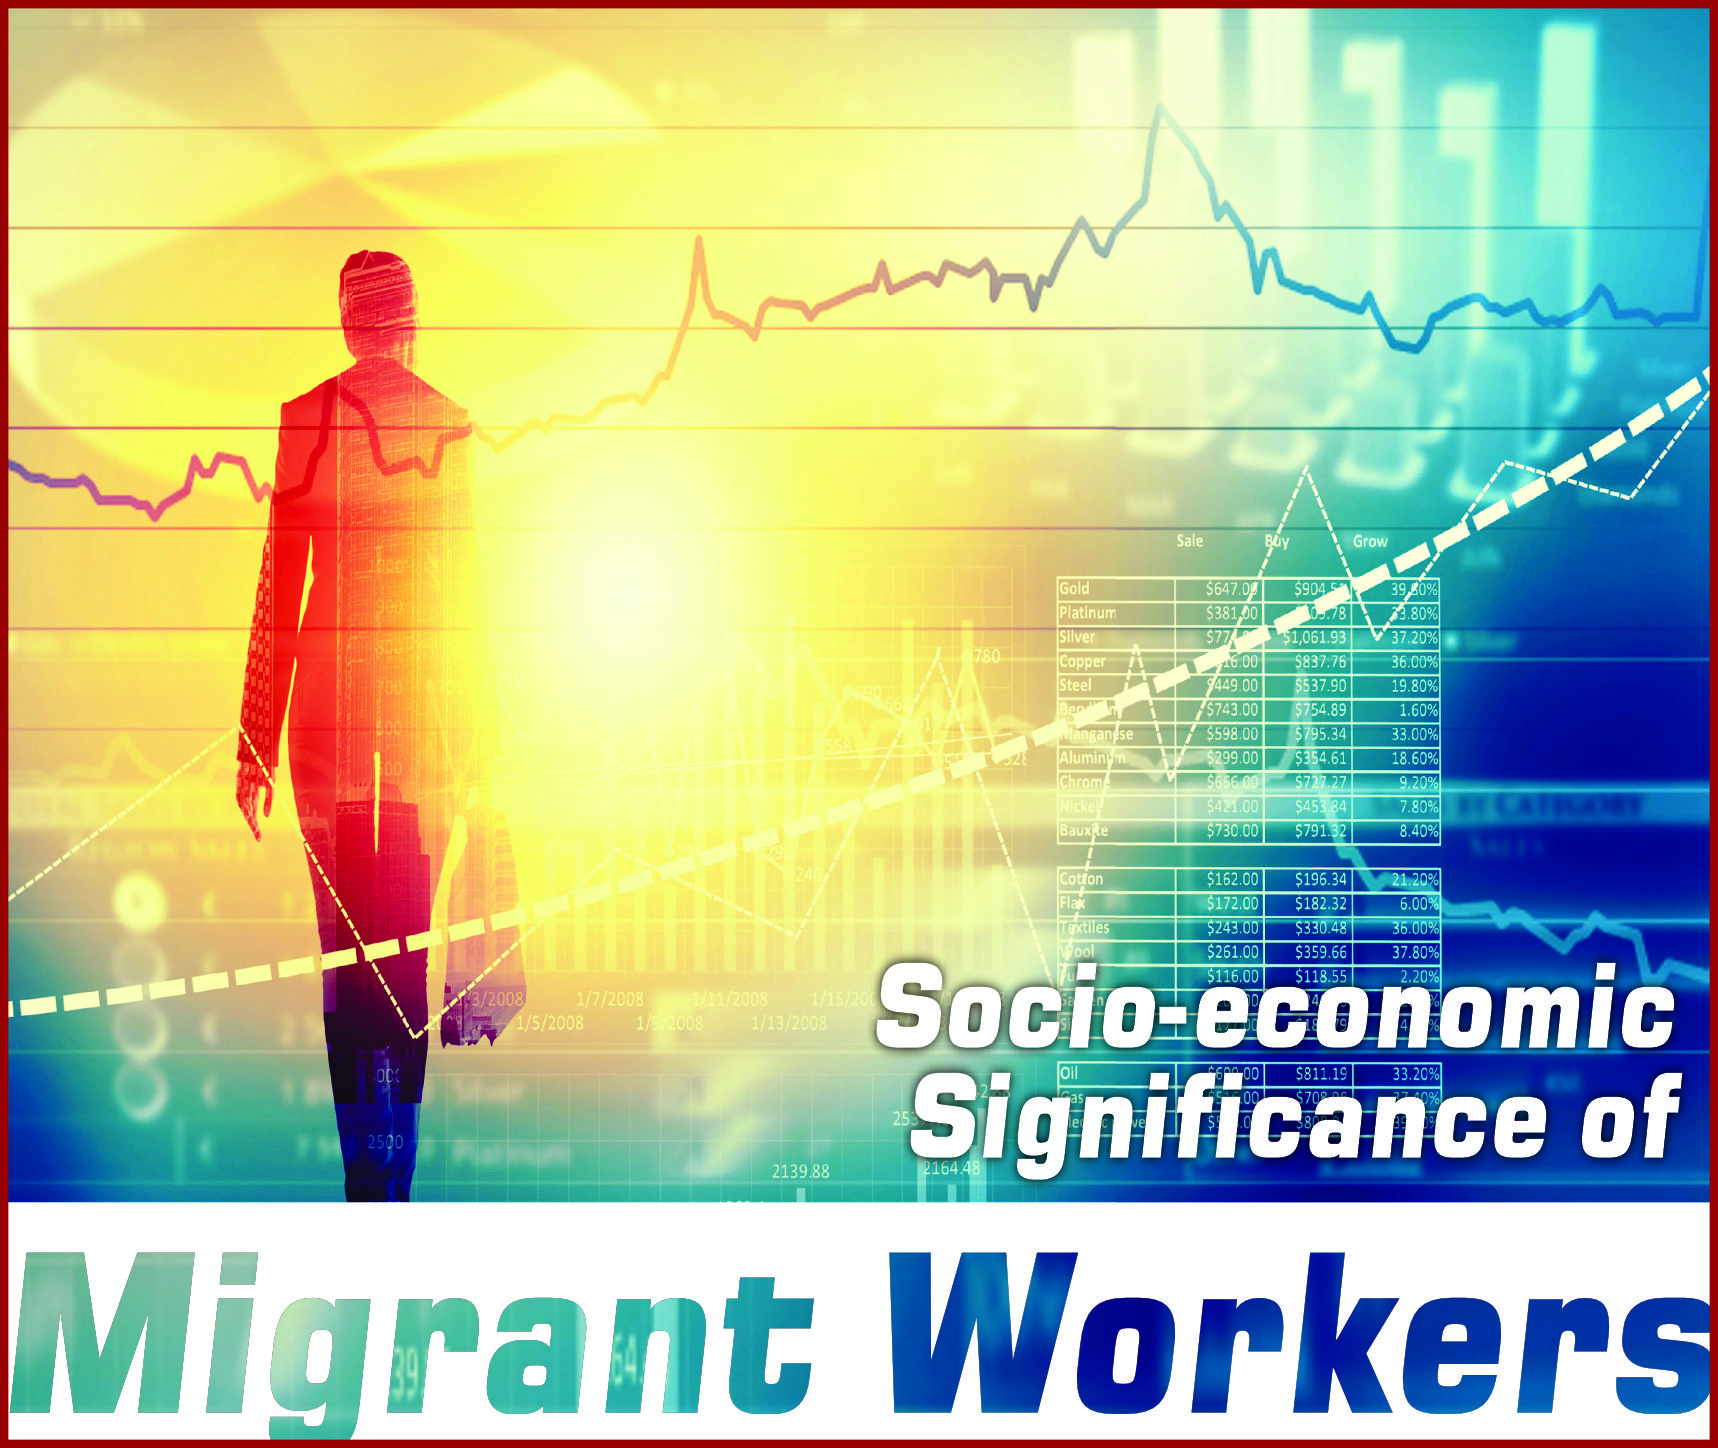 You are currently viewing Socio-economic Significance of Migrant Workers